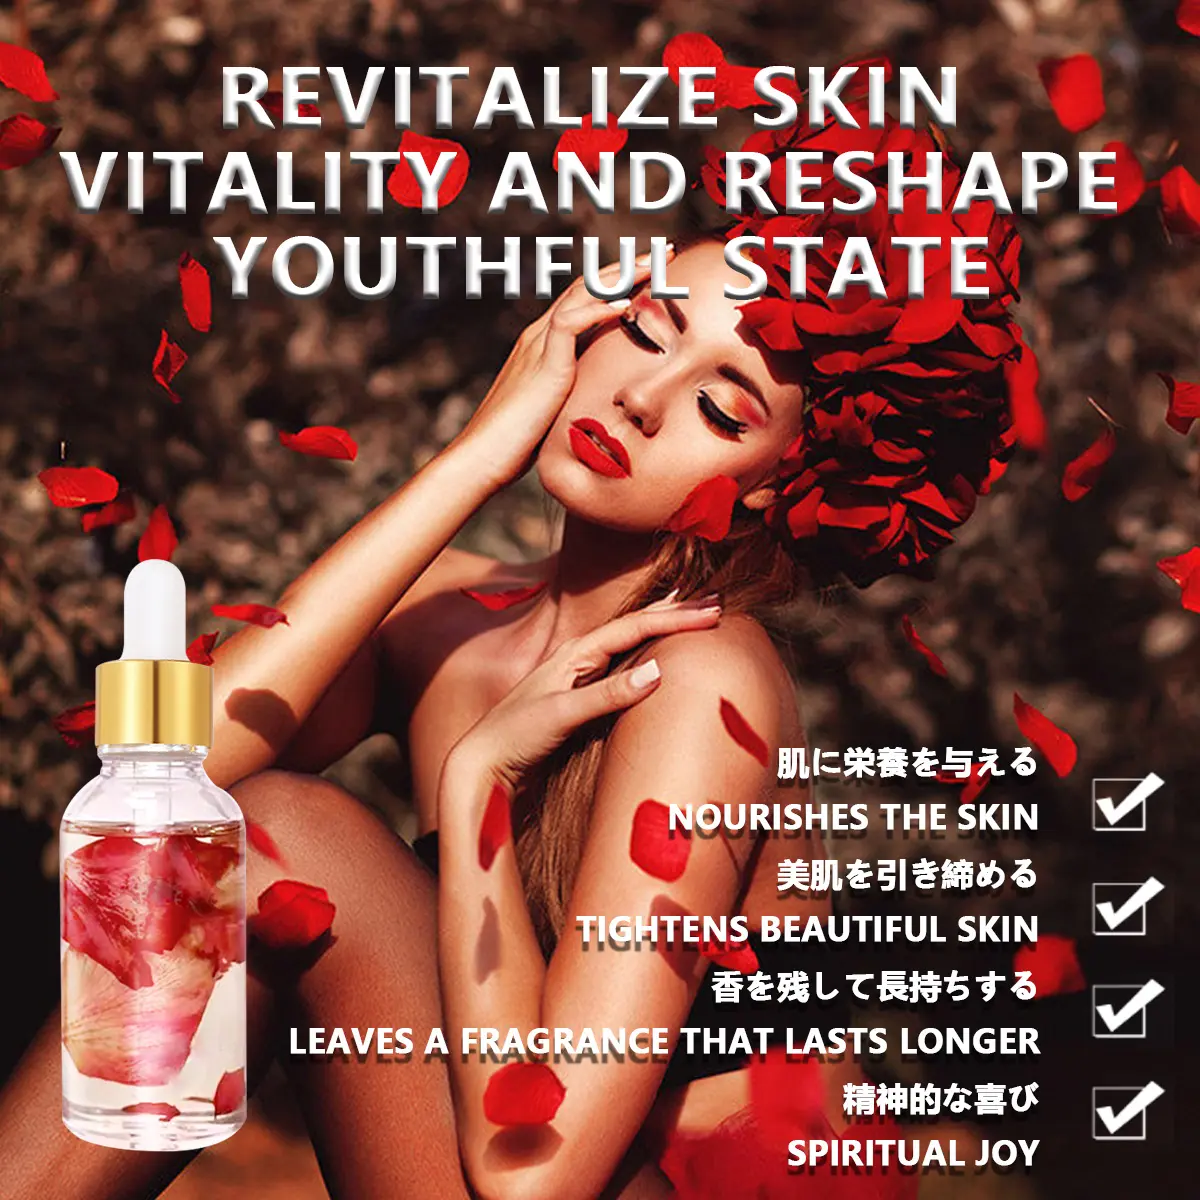 sex oil，body oil for sexy time，coconut oil，ky jelly hydrate for women sensitive skin，lubricate woman，oil based adult lubricant，silicone lubricants for privacy in oil